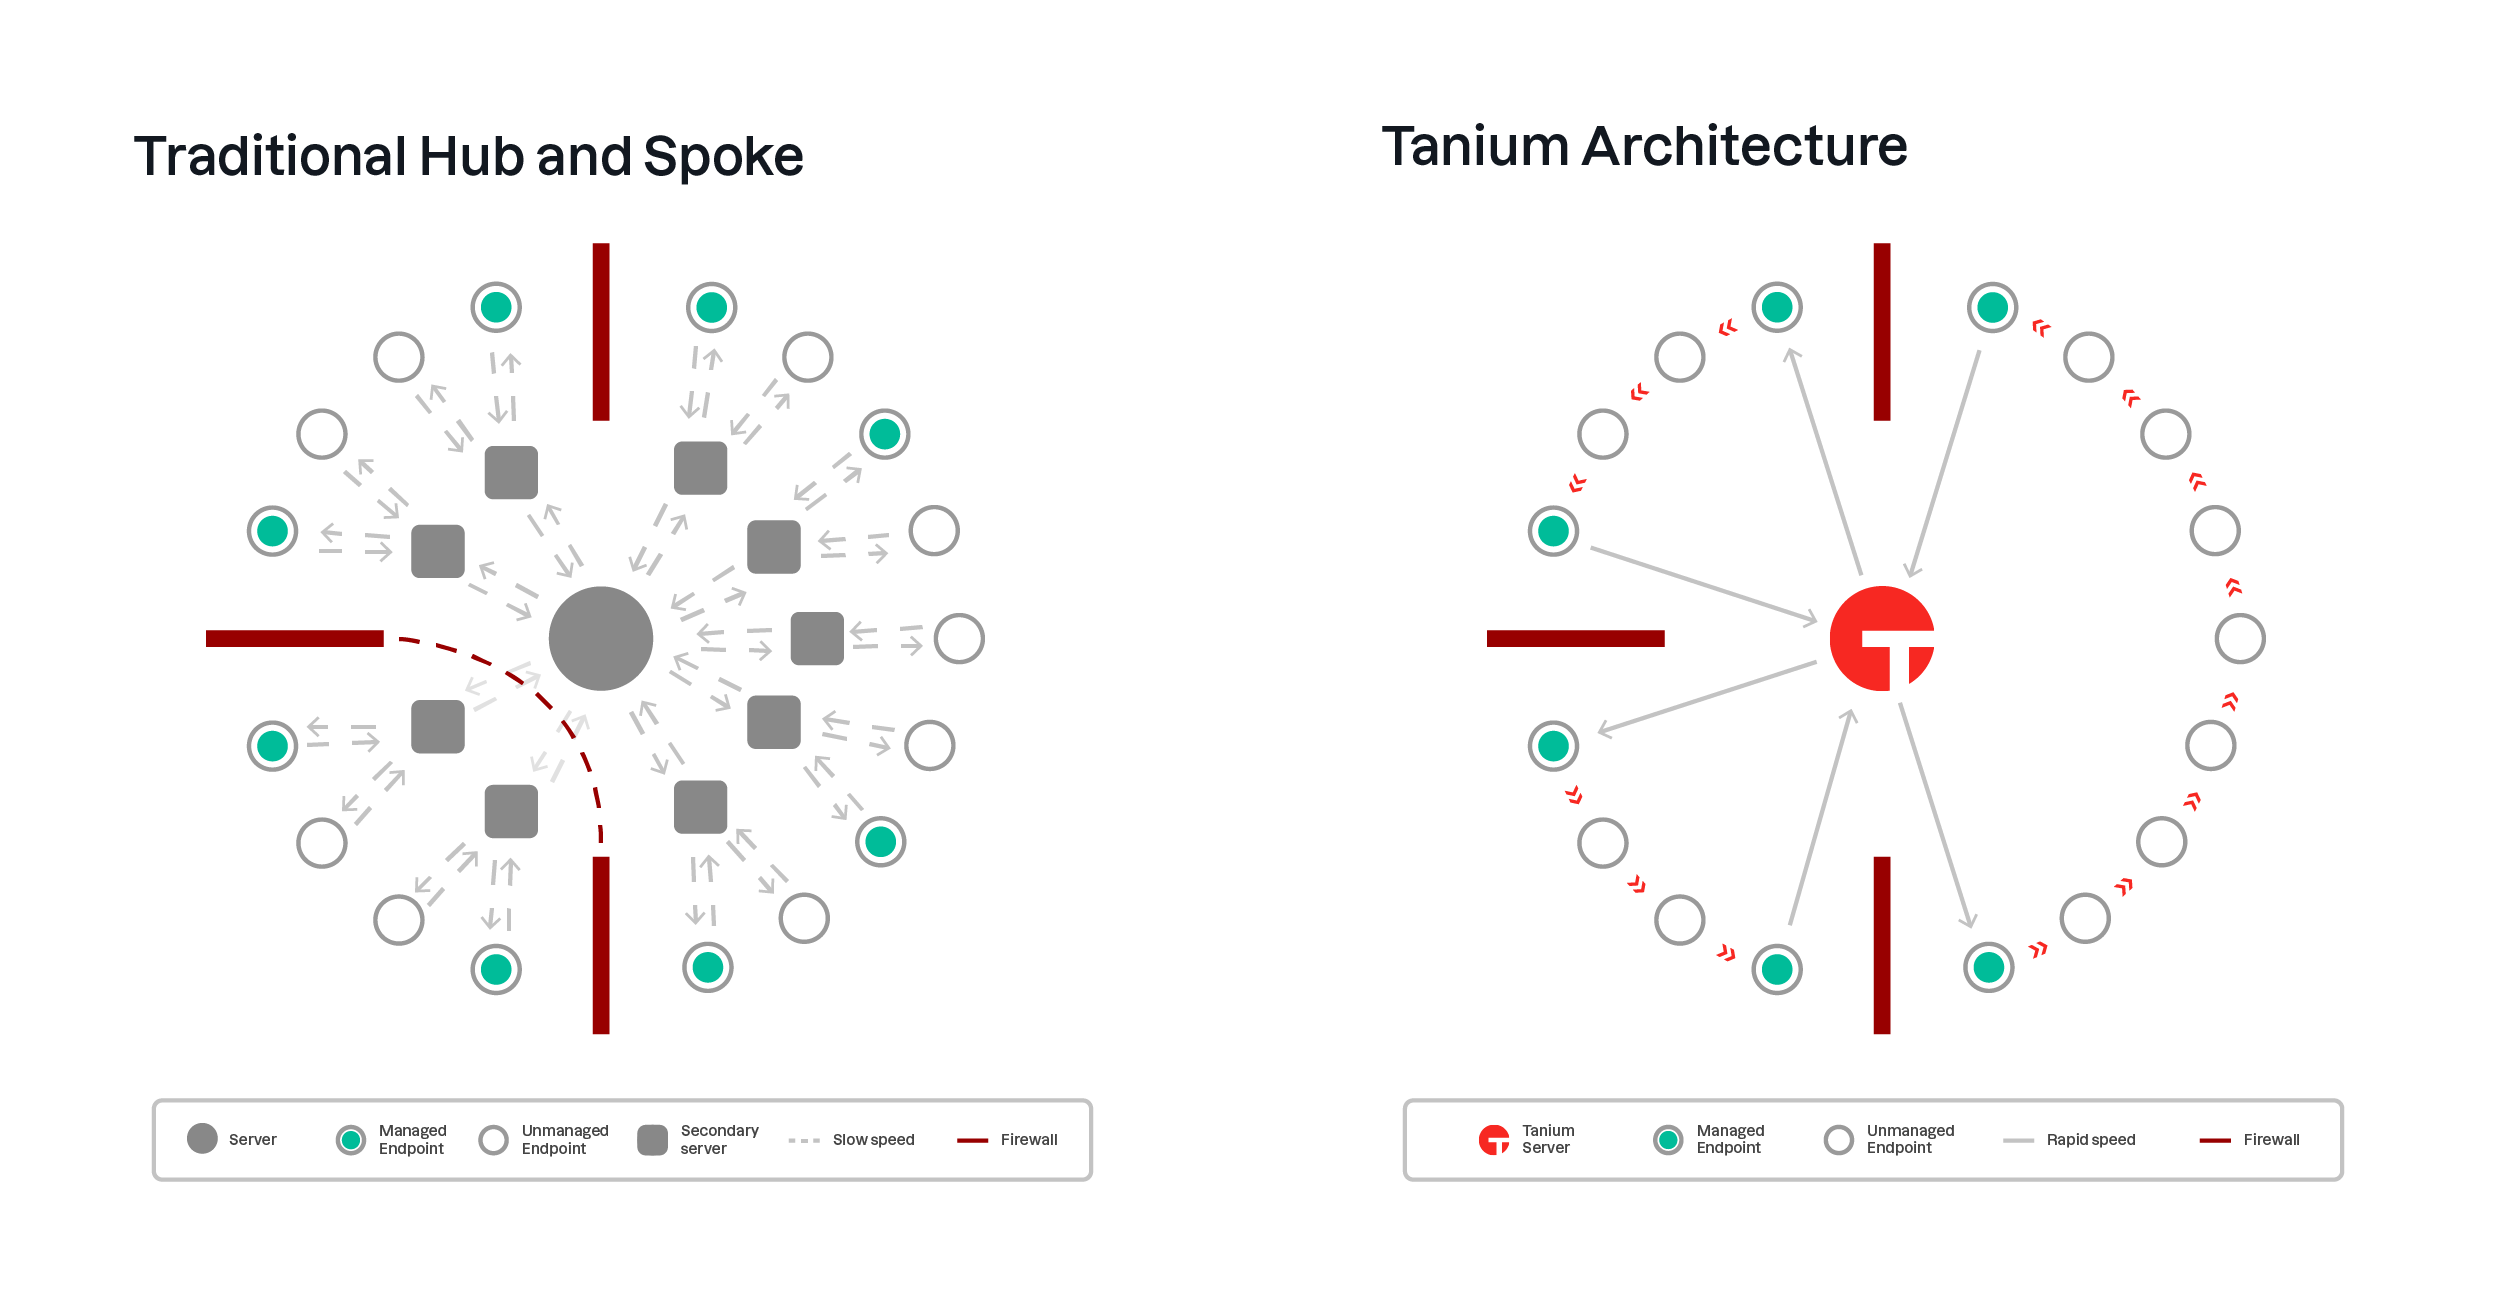 Diagram of Tanium's linear chain architecture versus a traditional hub-and-spoke model